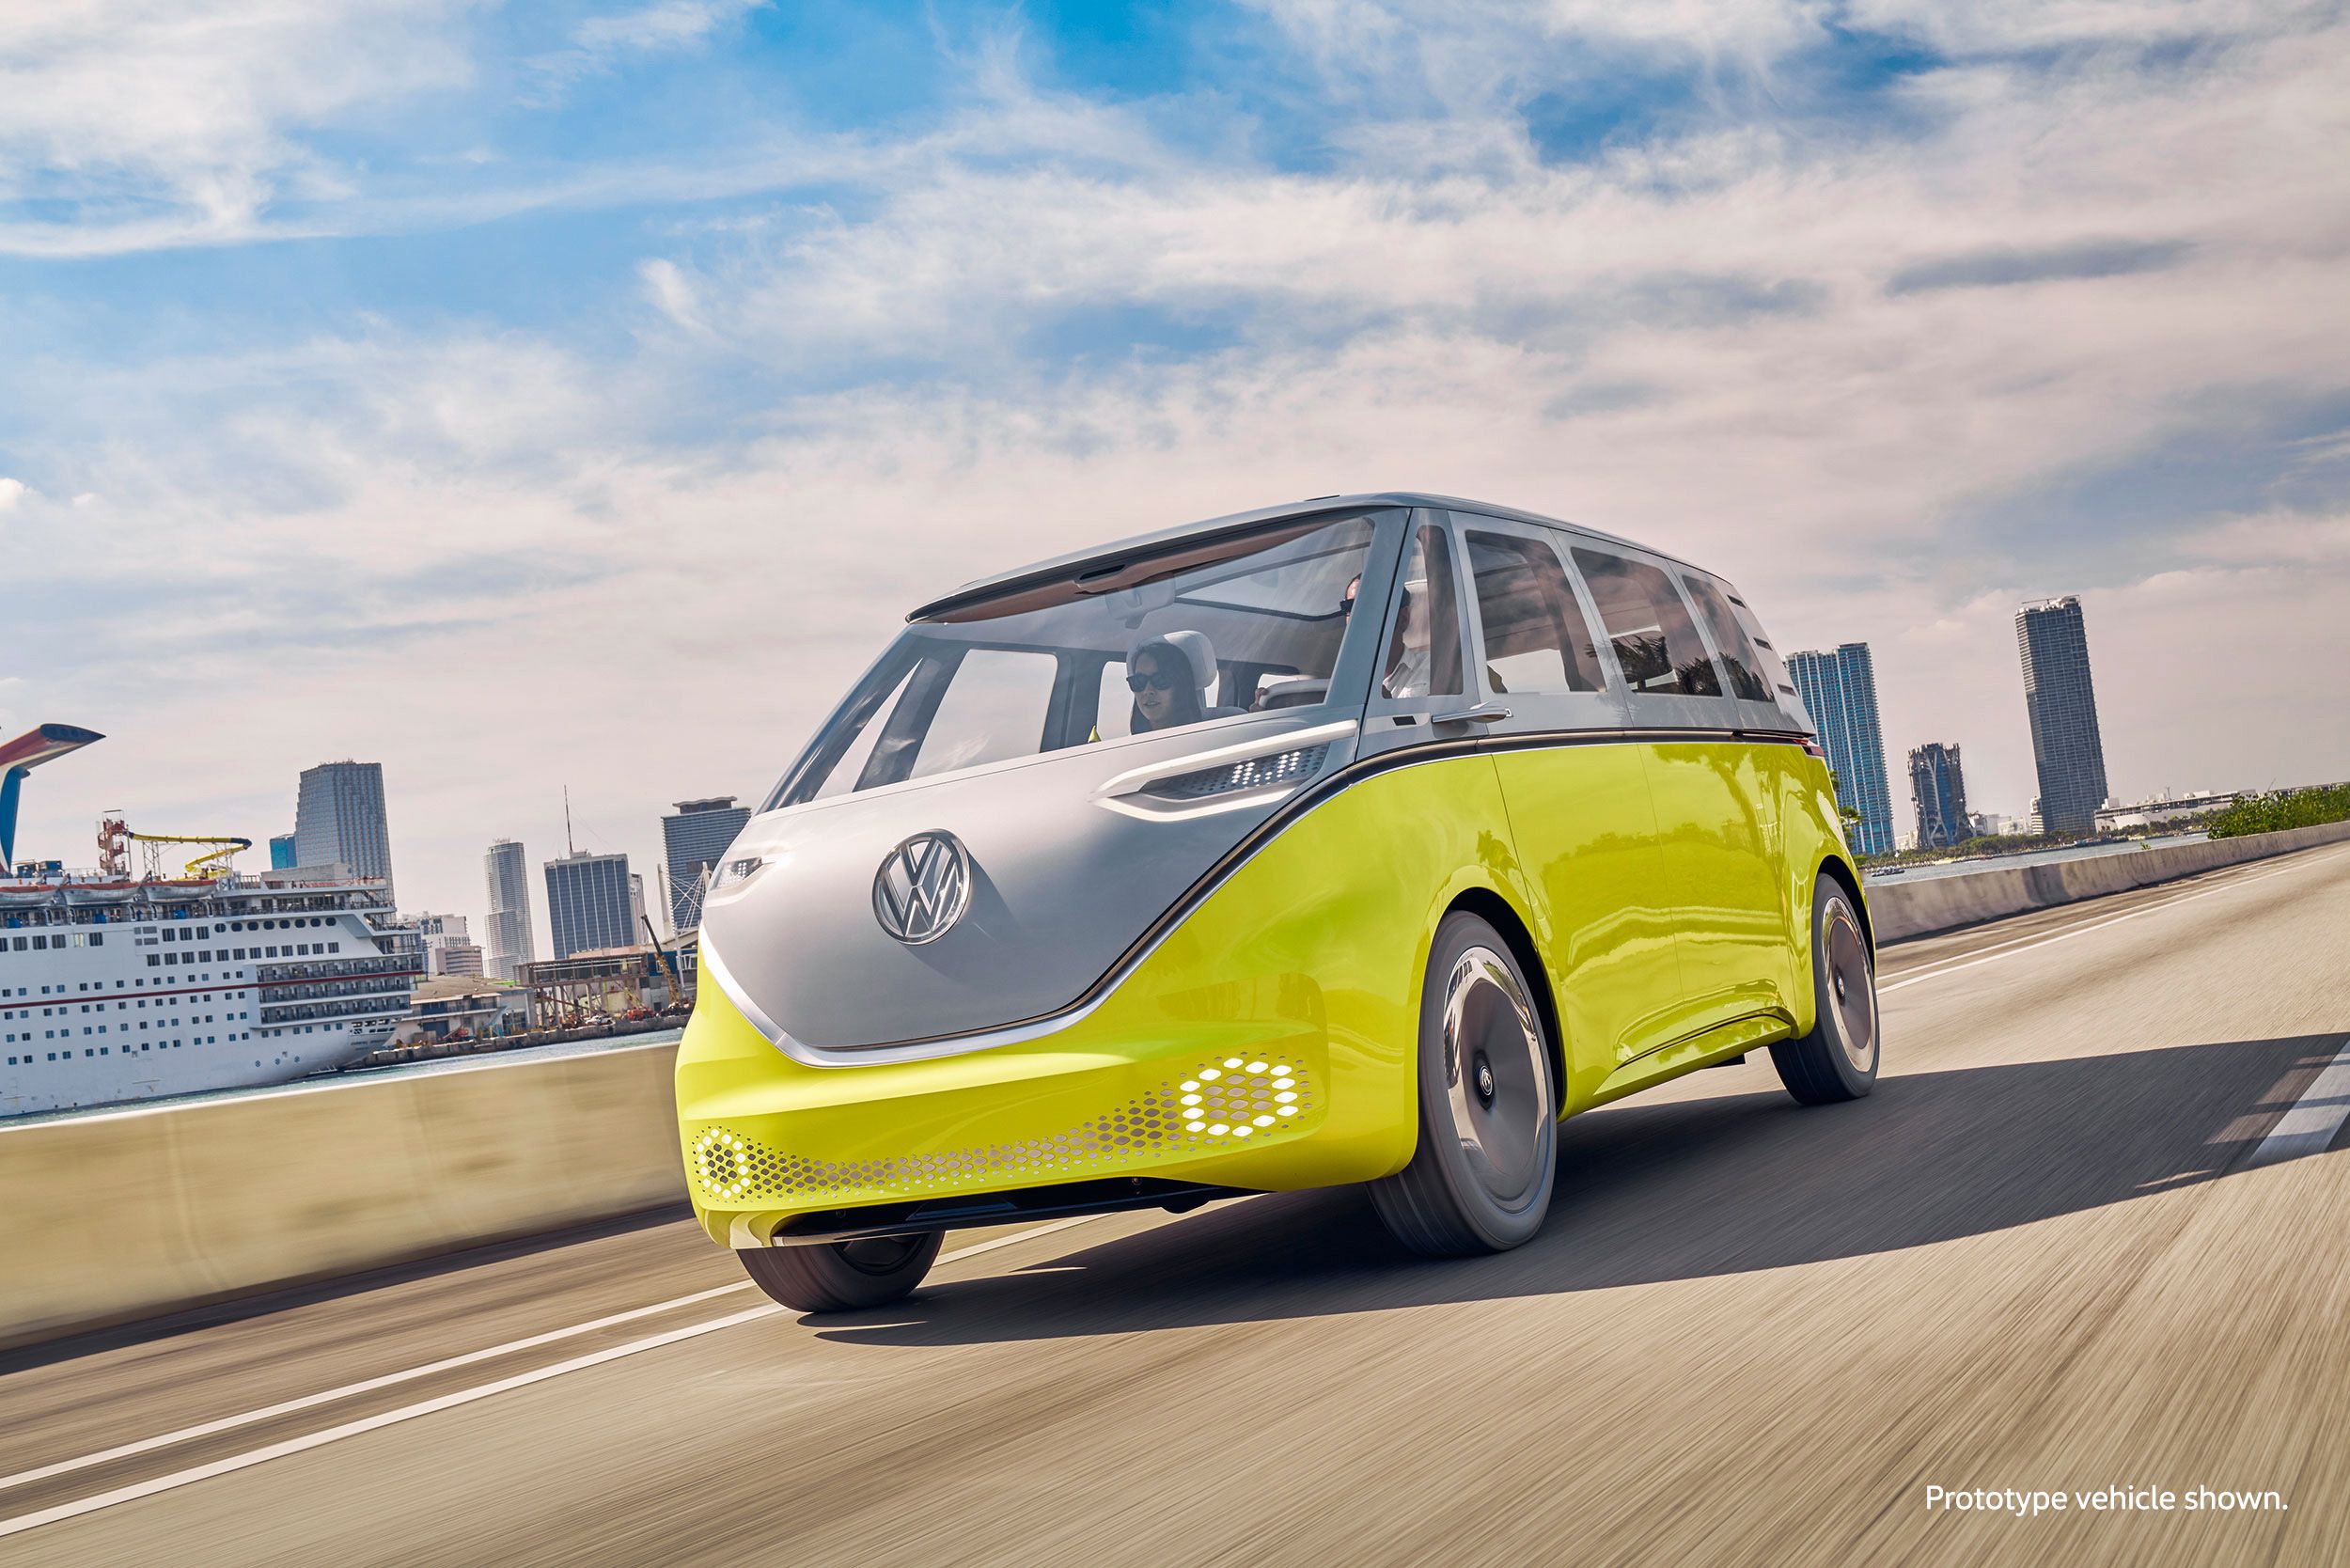 VW is creating an electric future. This is what it looks like